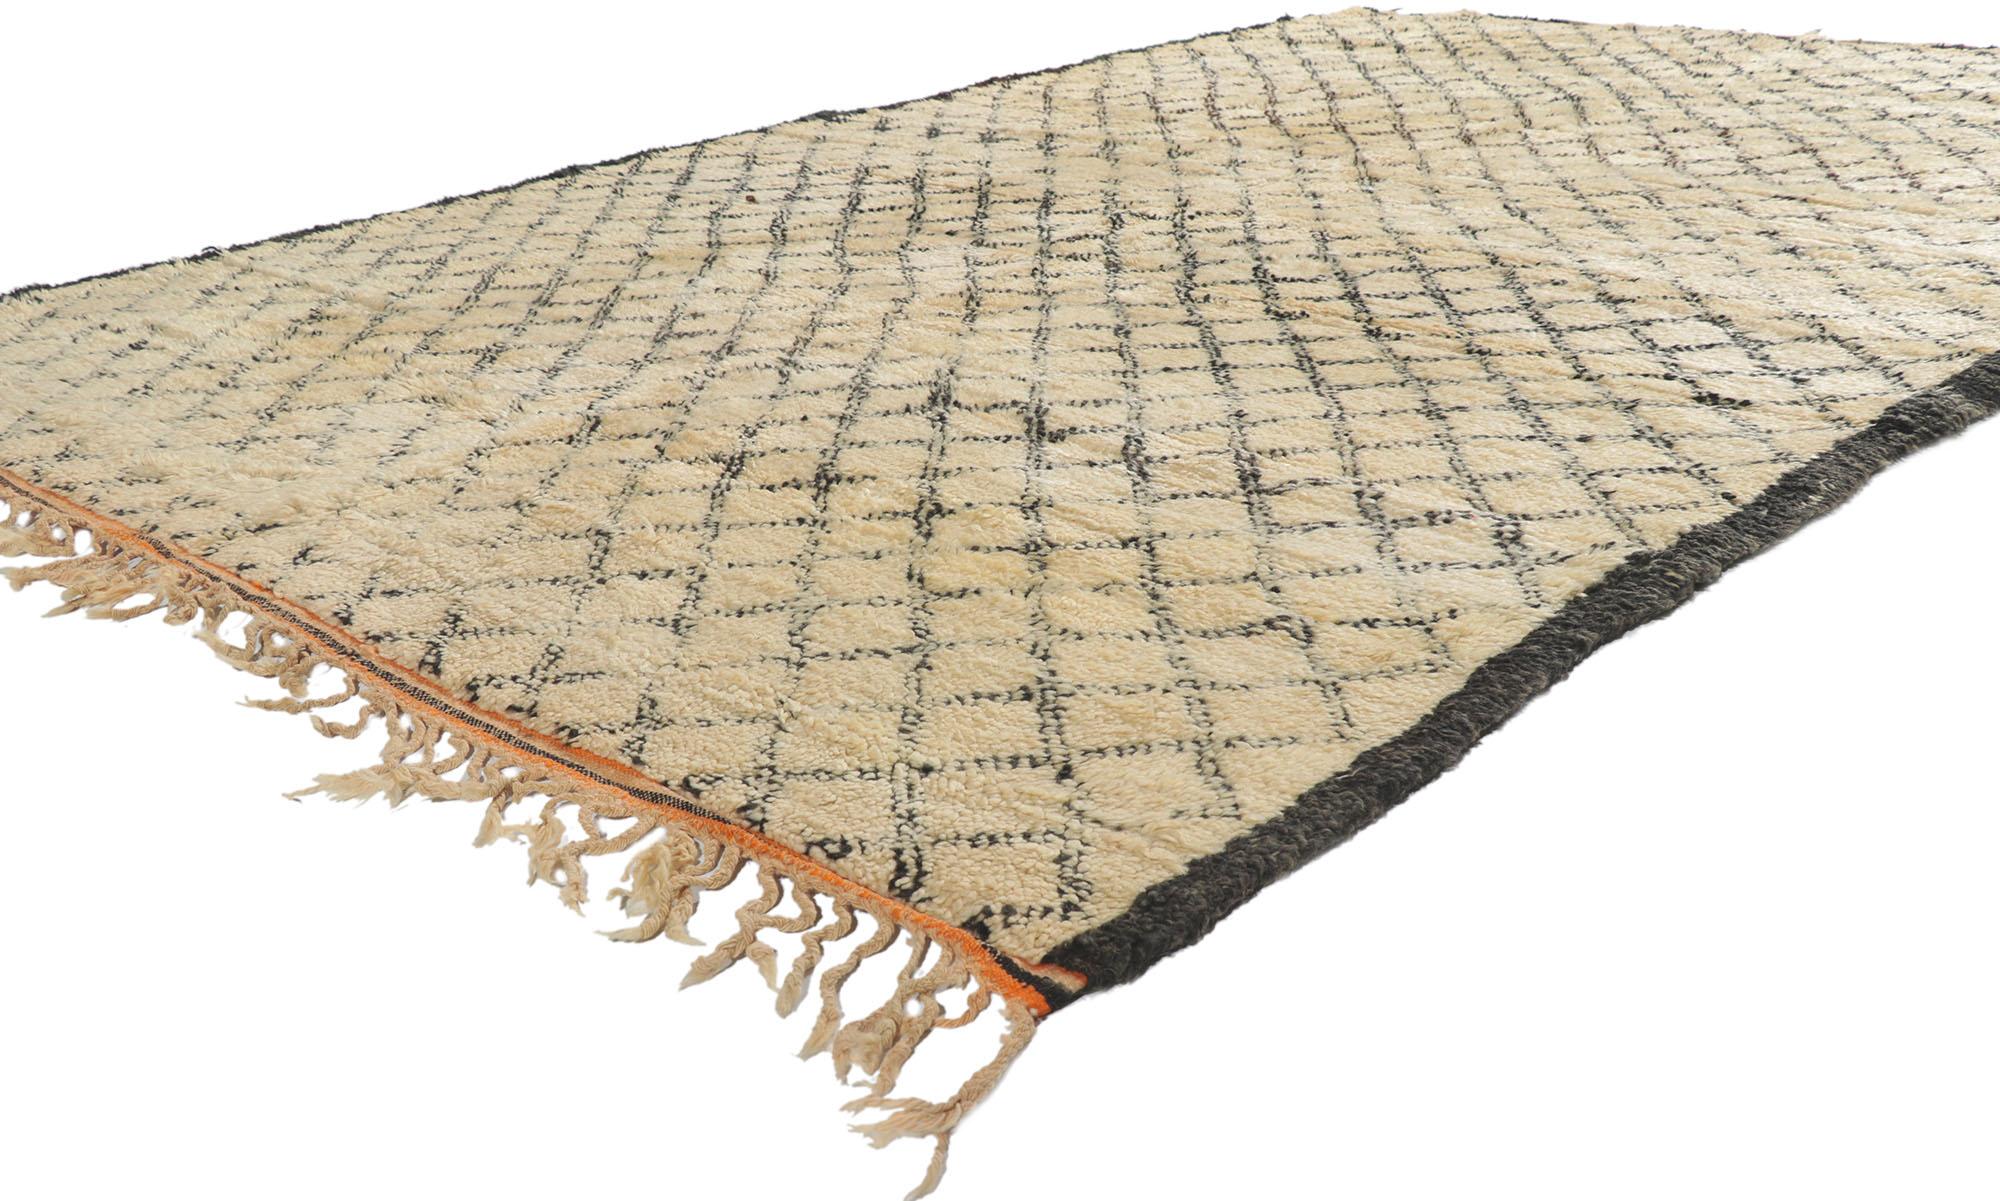 21363 Vintage Moroccan Beni Ourain Rug 06'08 x 09'10. Originating from the Beni Ourain tribe, a notable faction within the vast Berber community of Morocco, these Moroccan rugs are skillfully crafted using untreated sheep's wool, emphasizing their